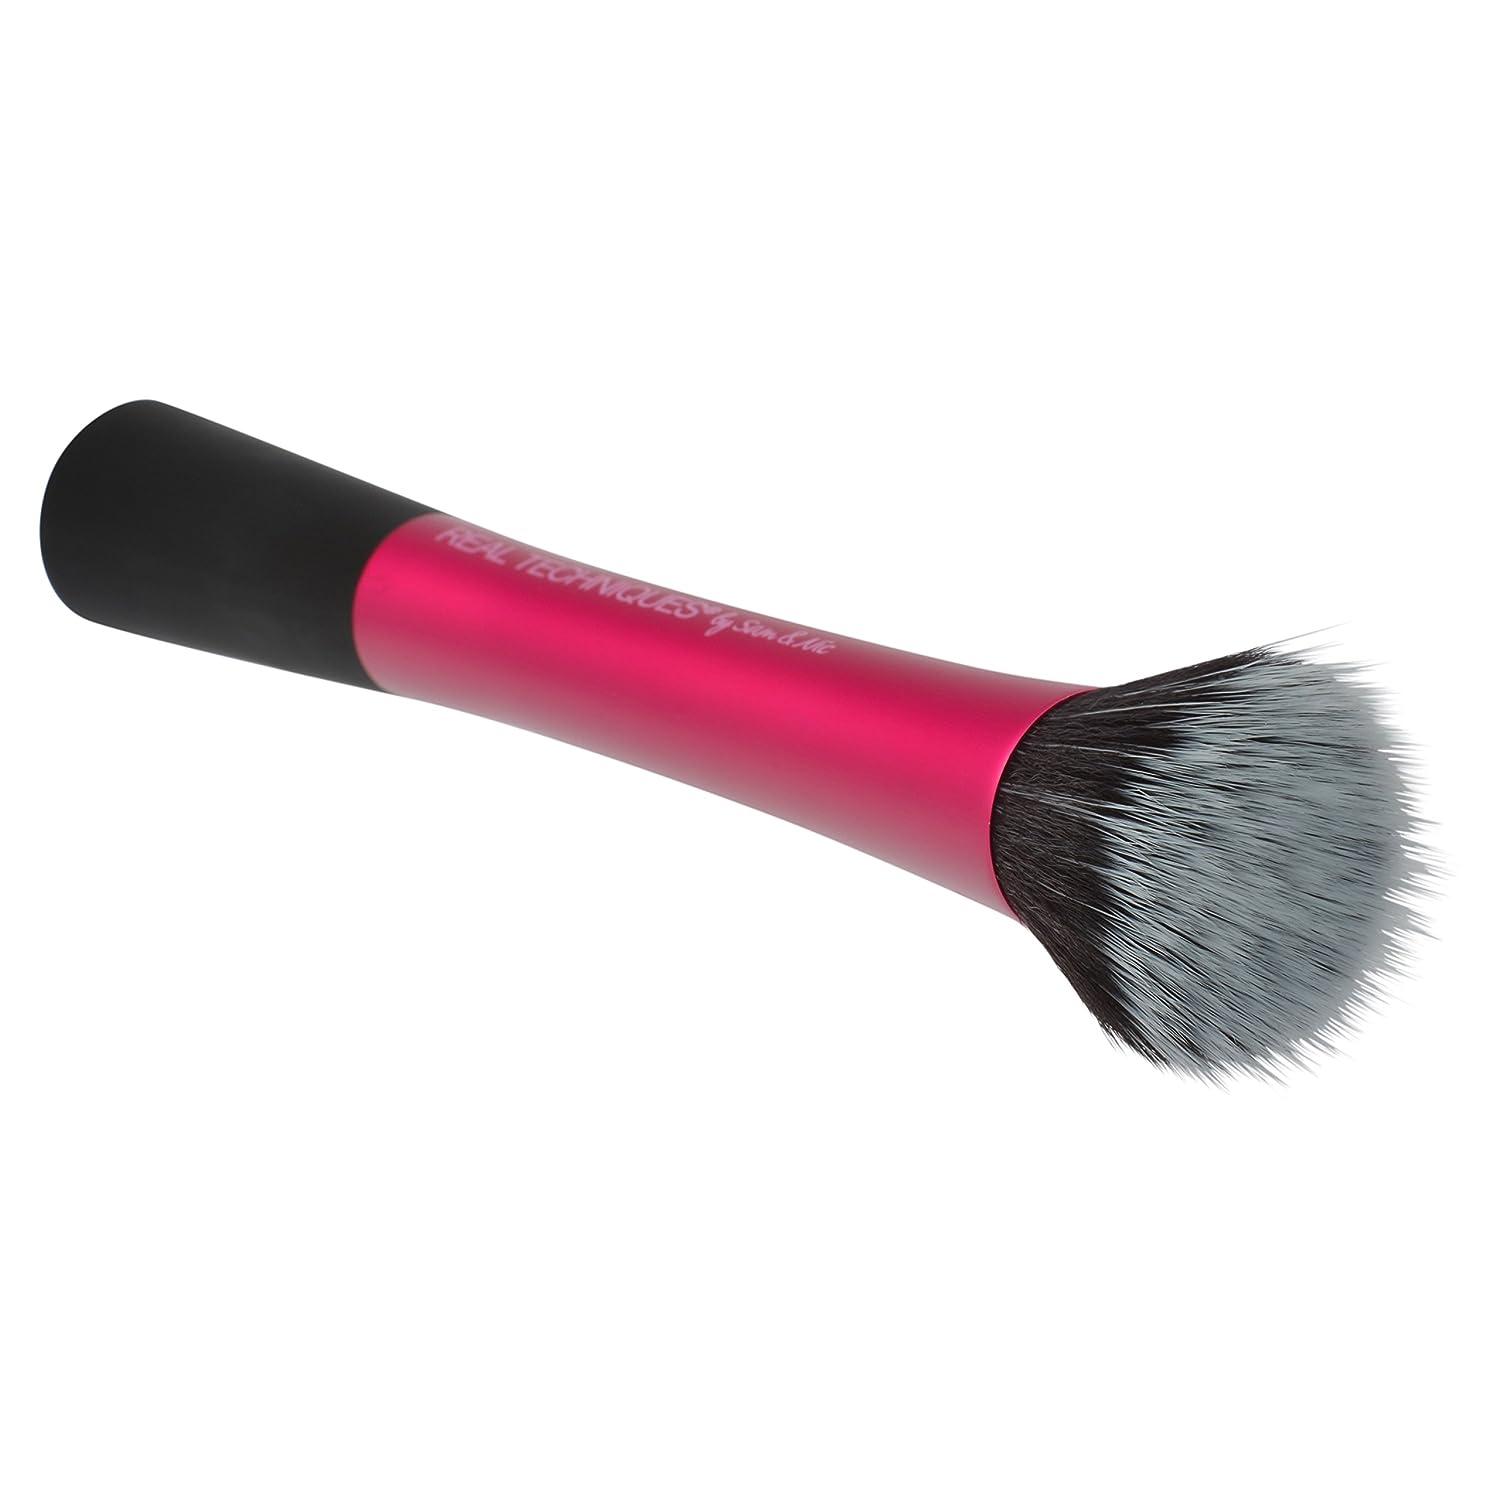 Real Techniques Stippling Brush Dual-Fiber Uniquely Shaped and